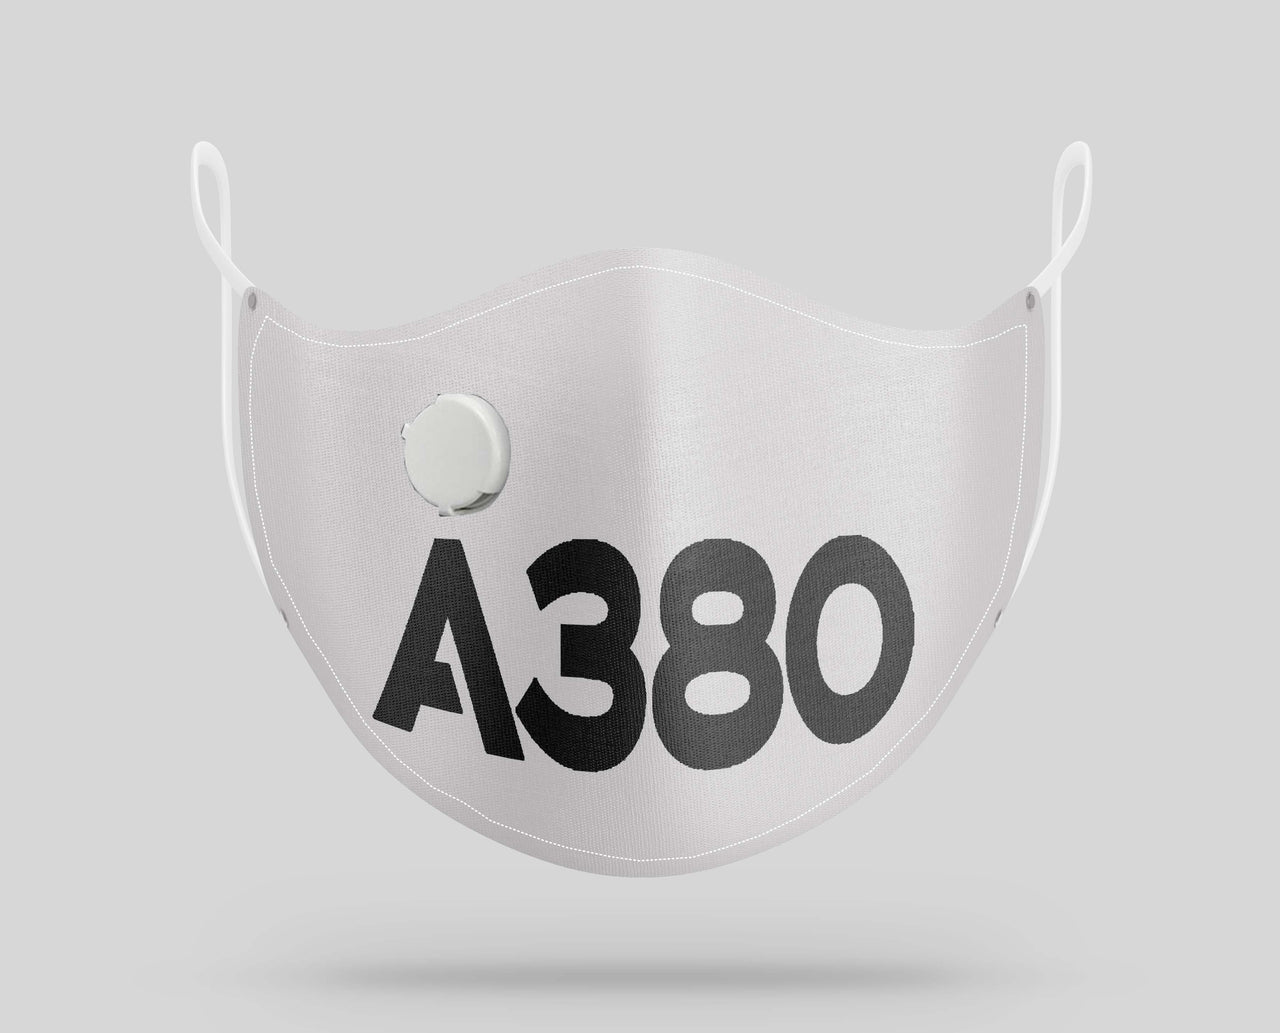 Airbus A380 Text Designed Face Masks